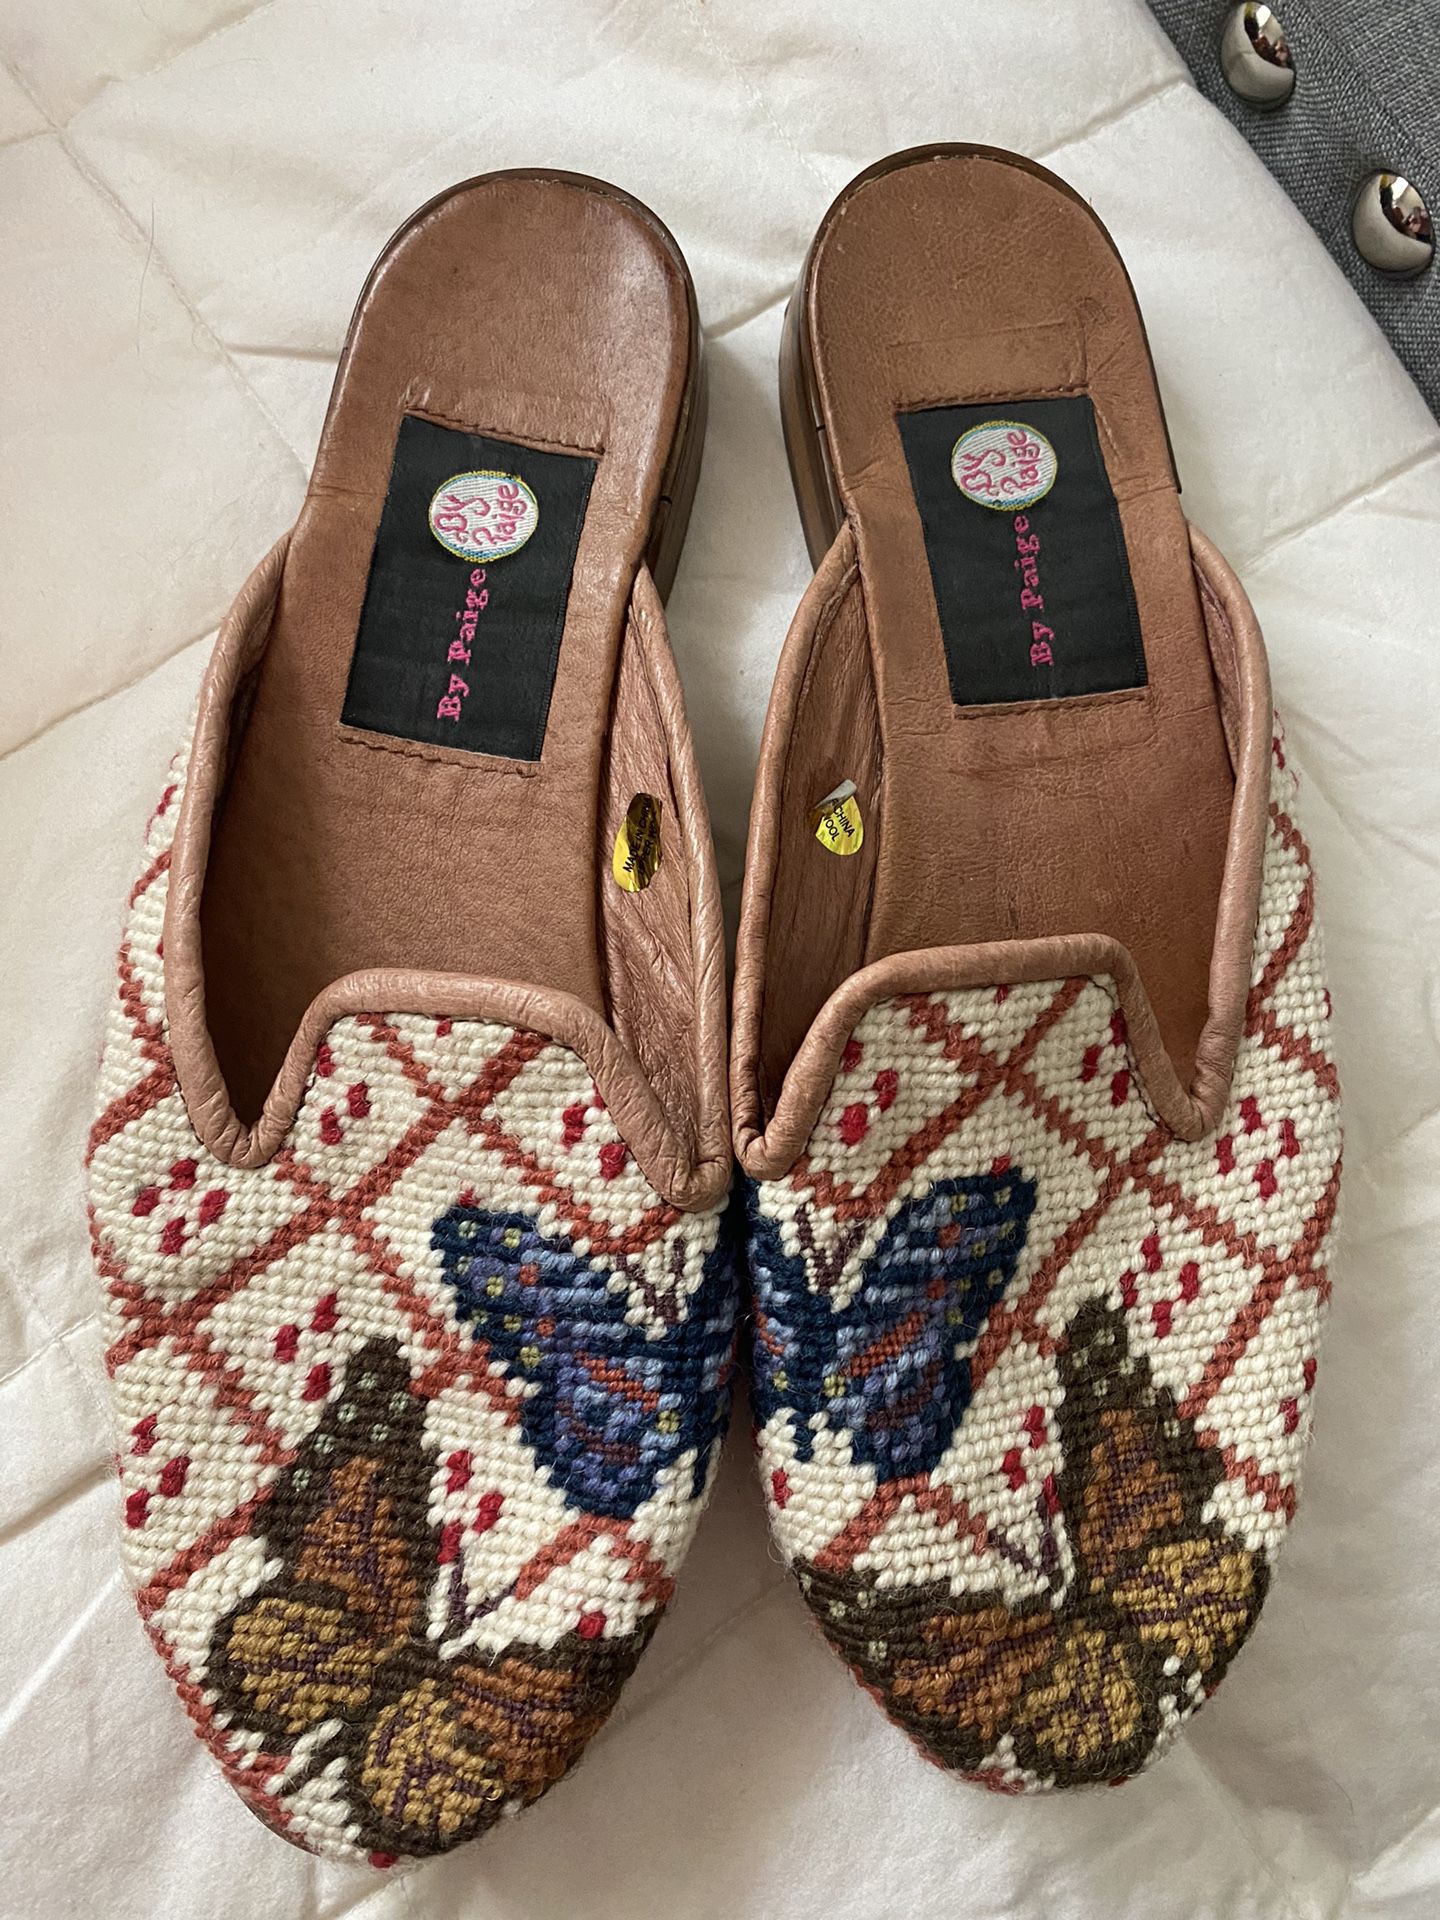 By Paige Slip On Leather Inside And Trim With Cross Stitch